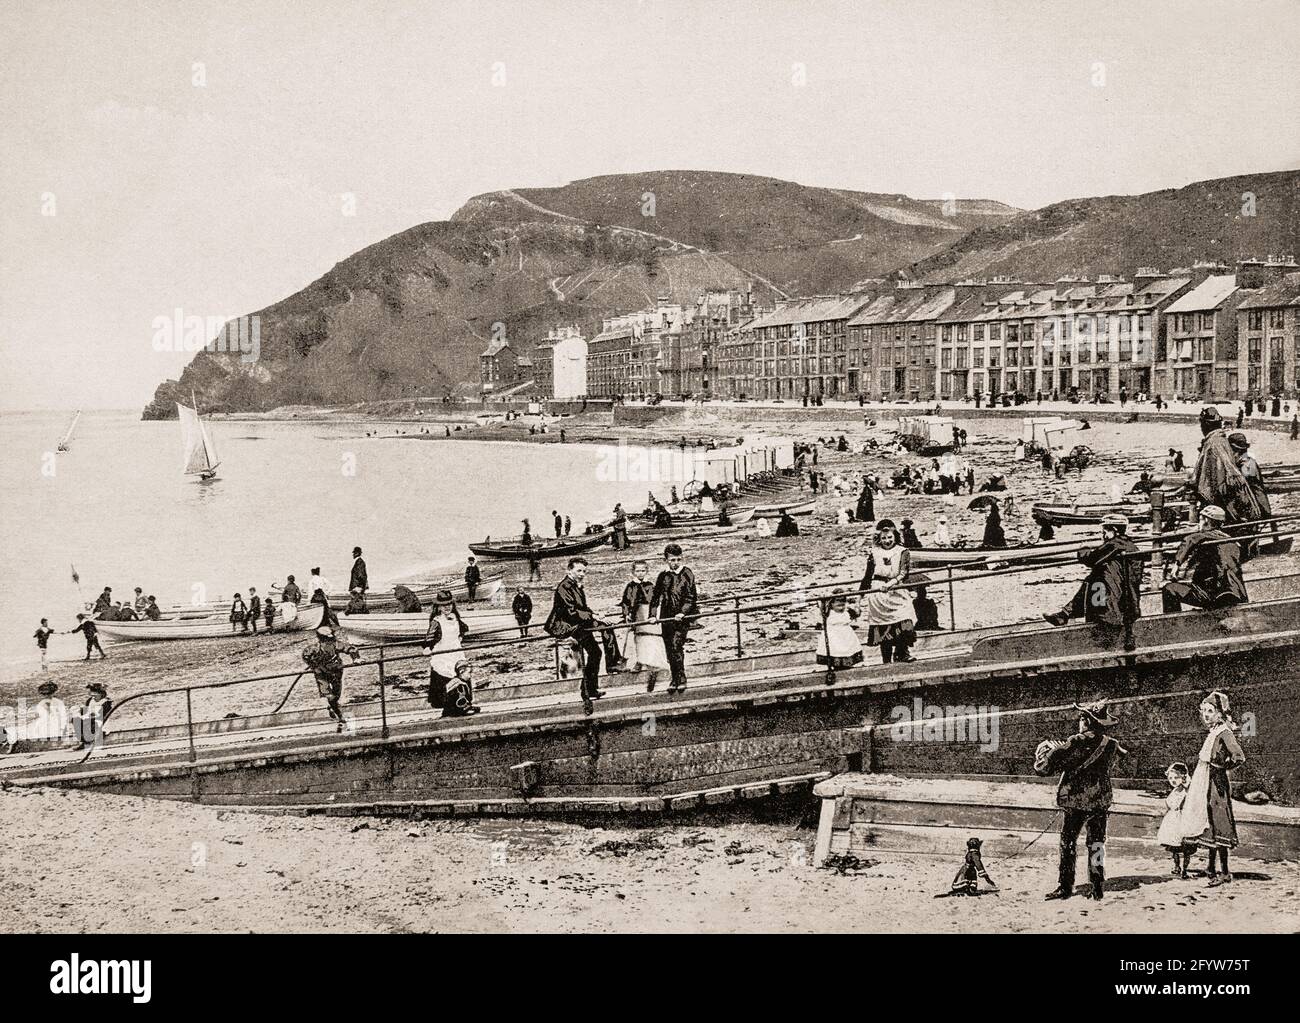 A late 19th century view of the beach Aberystwyth, a university town in Ceredigion, Wales. Historically in the historic county of Cardiganshire, in one form or another, Aberystwyth University has been a major educational location in Wales since the establishment of University College Wales in 1872. The arrival of the railway around 1870 gave rise to something of a Victorian tourist boom; the town was once even billed as the 'Biarritz of Wales'. Stock Photo